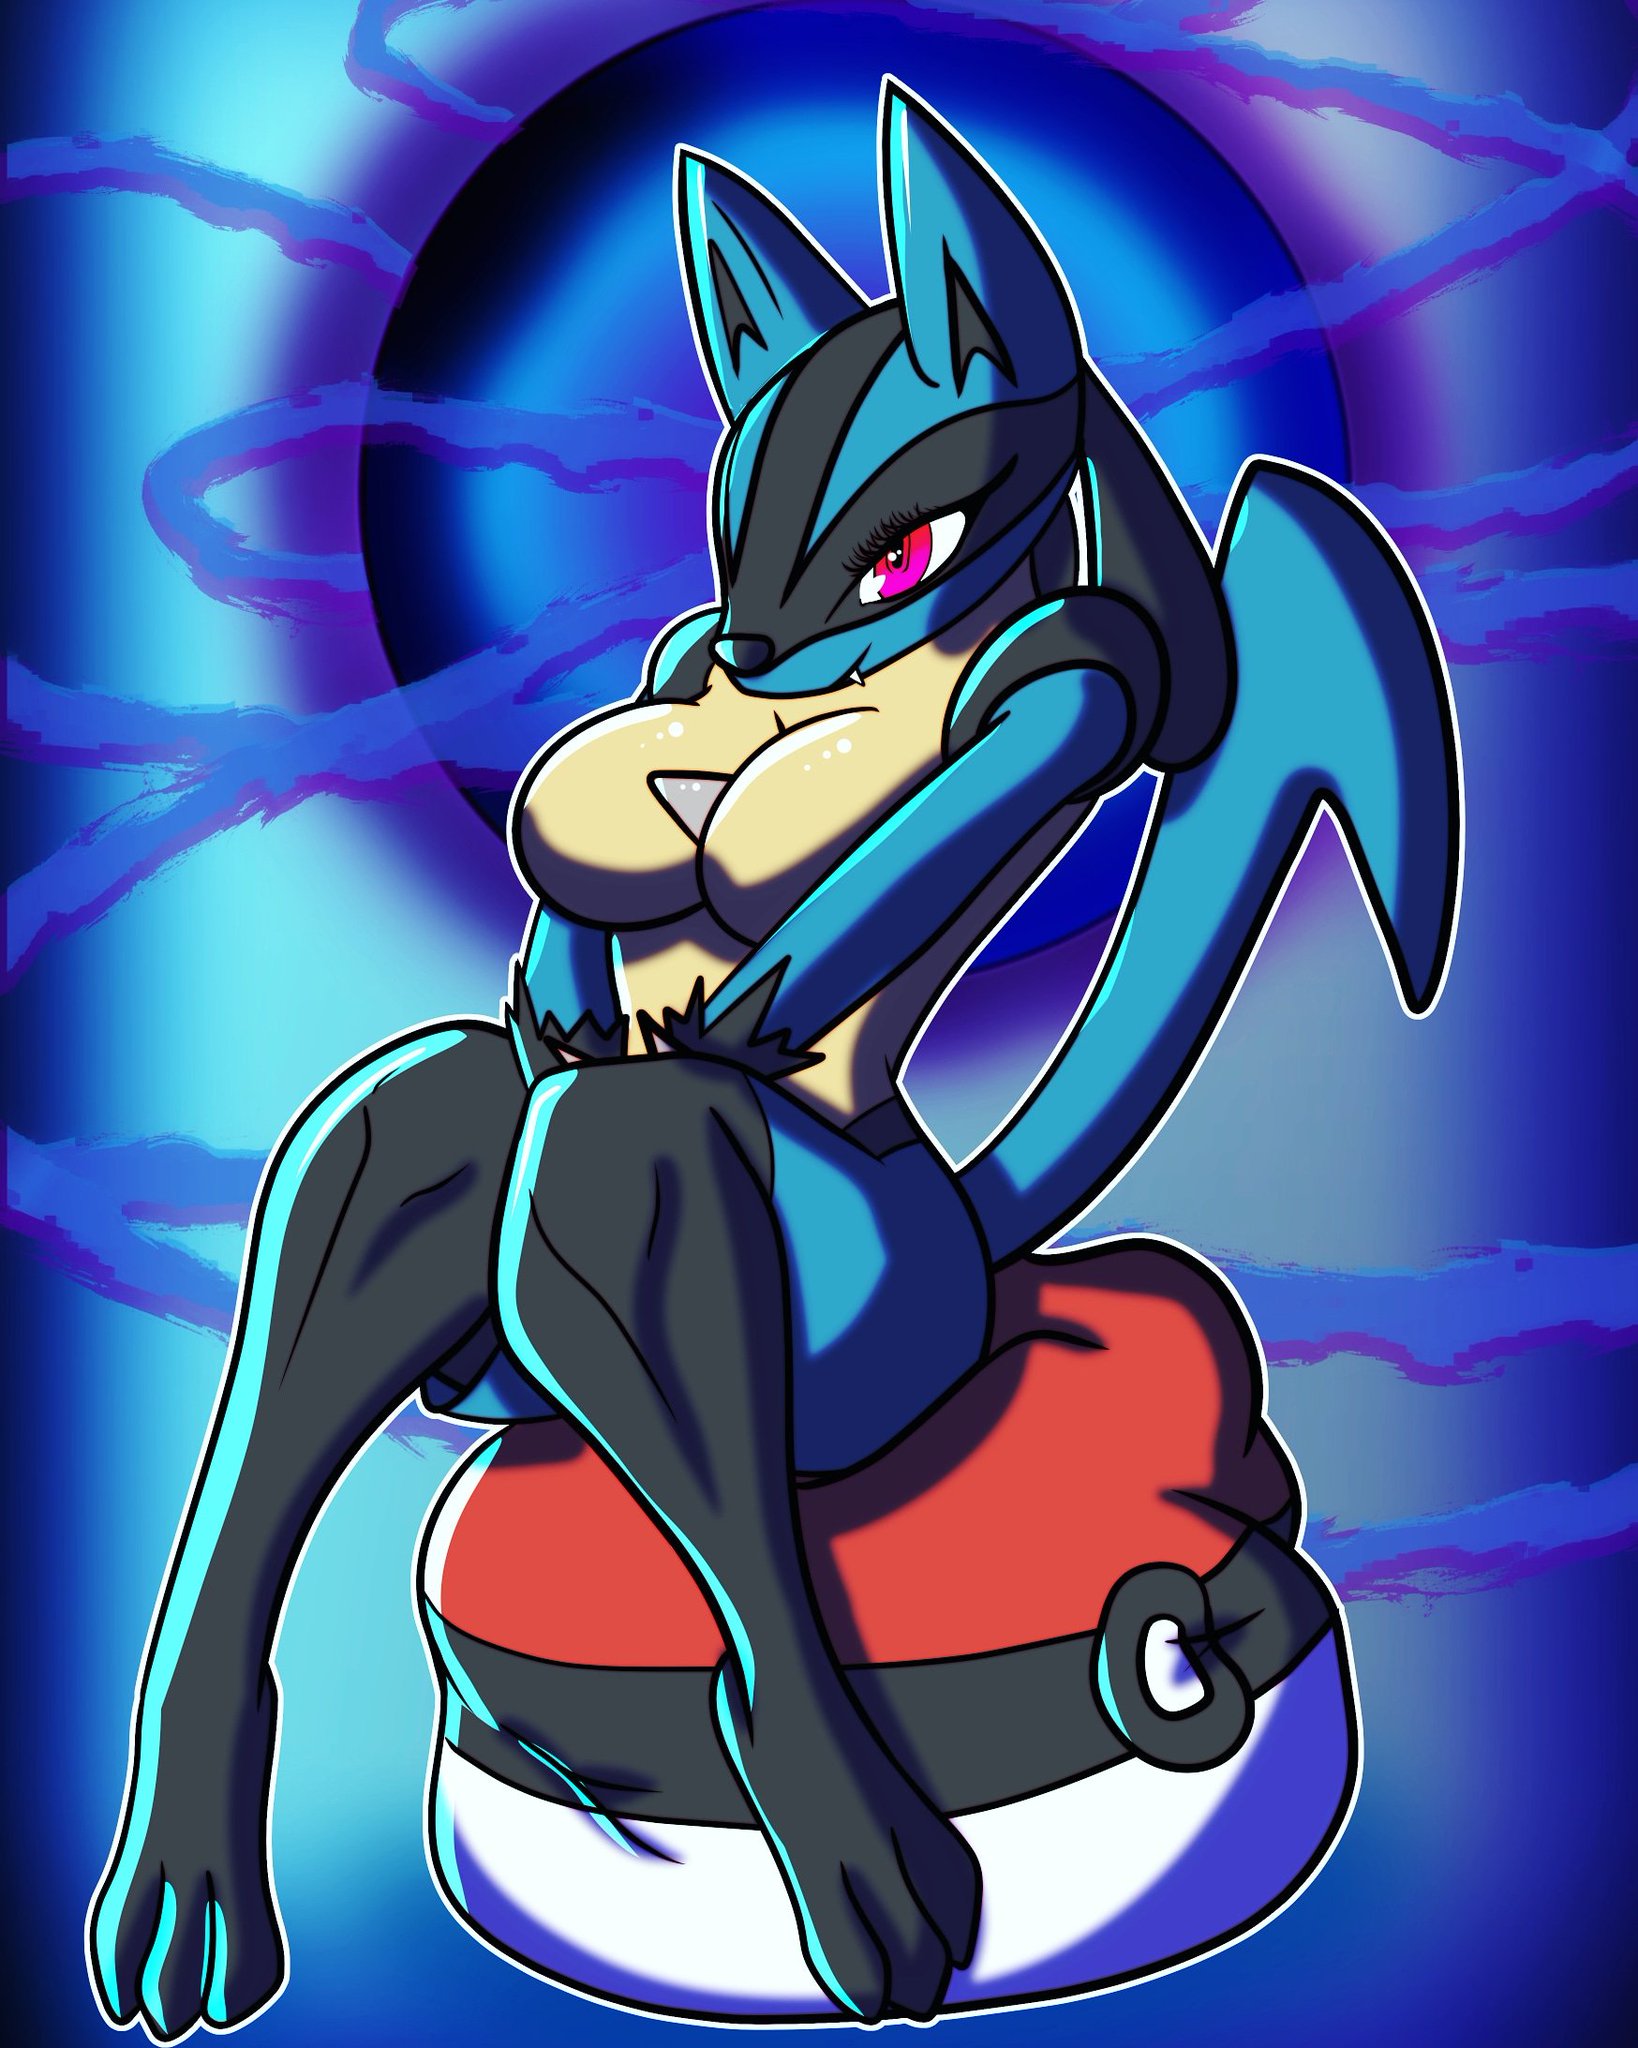 “Finally did something with that Lucario sketch. 

